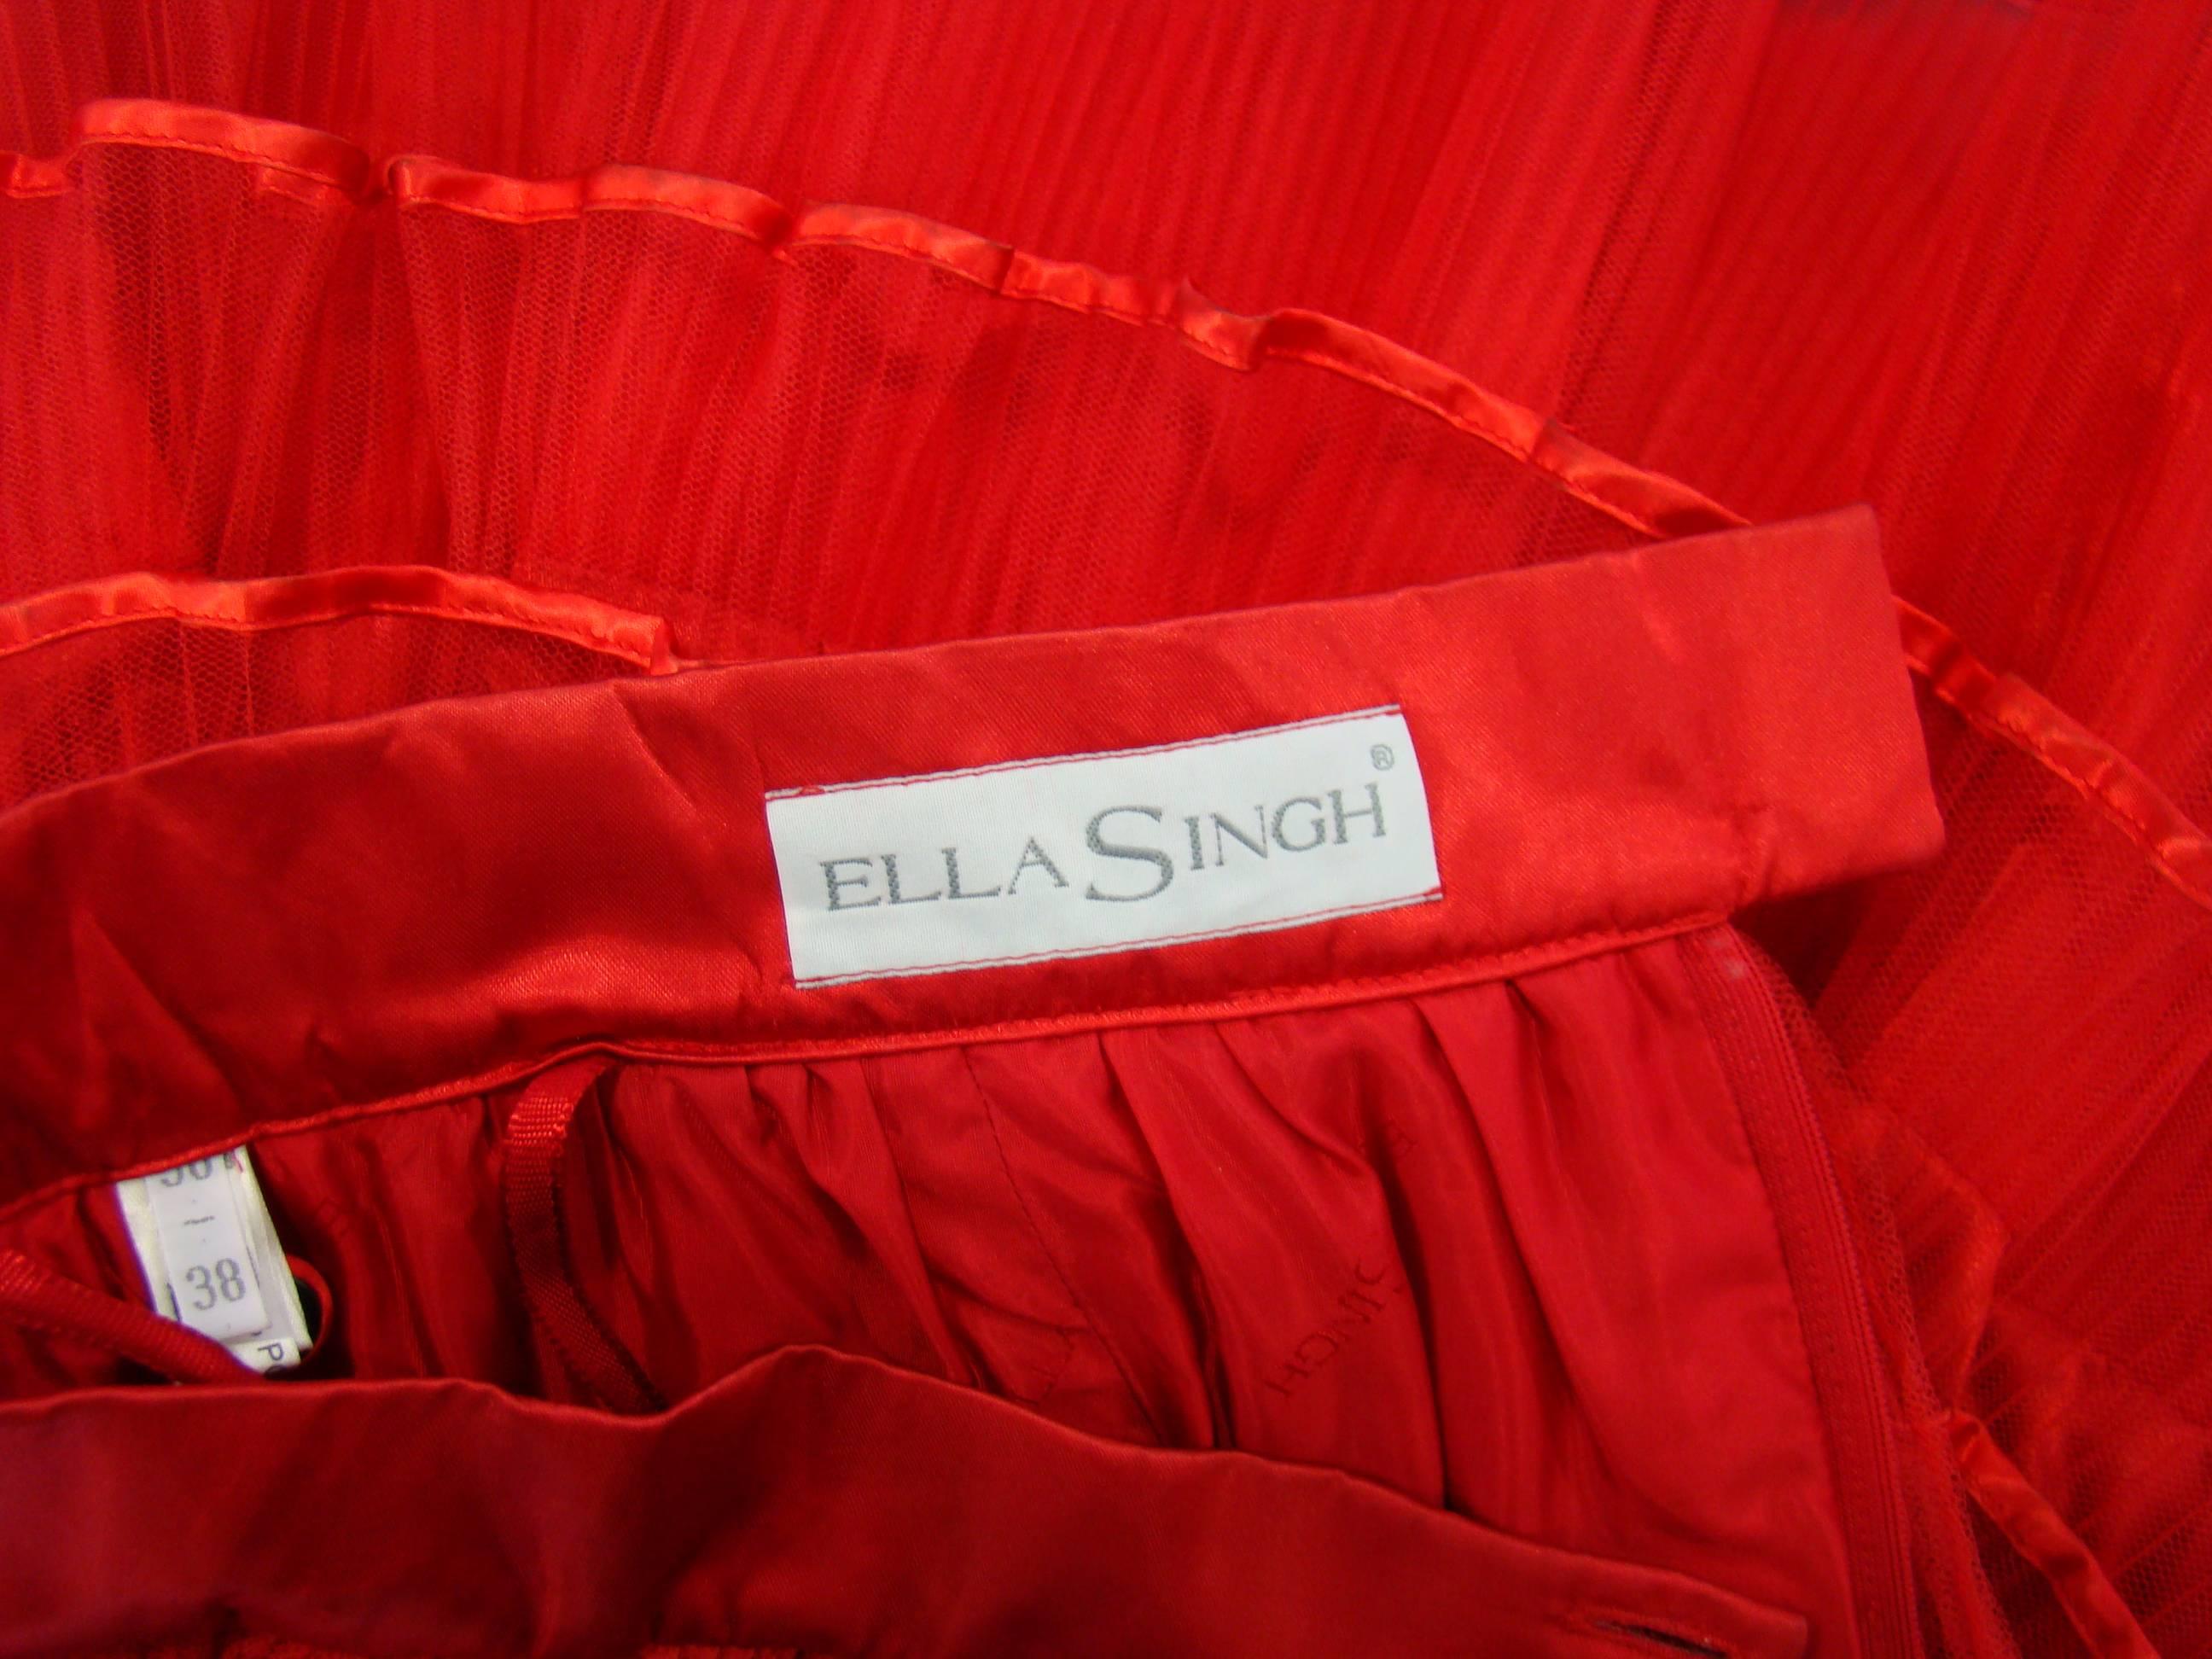 Rare Ella Singh Net Tiered Evening Skirt 1990's For Sale 1